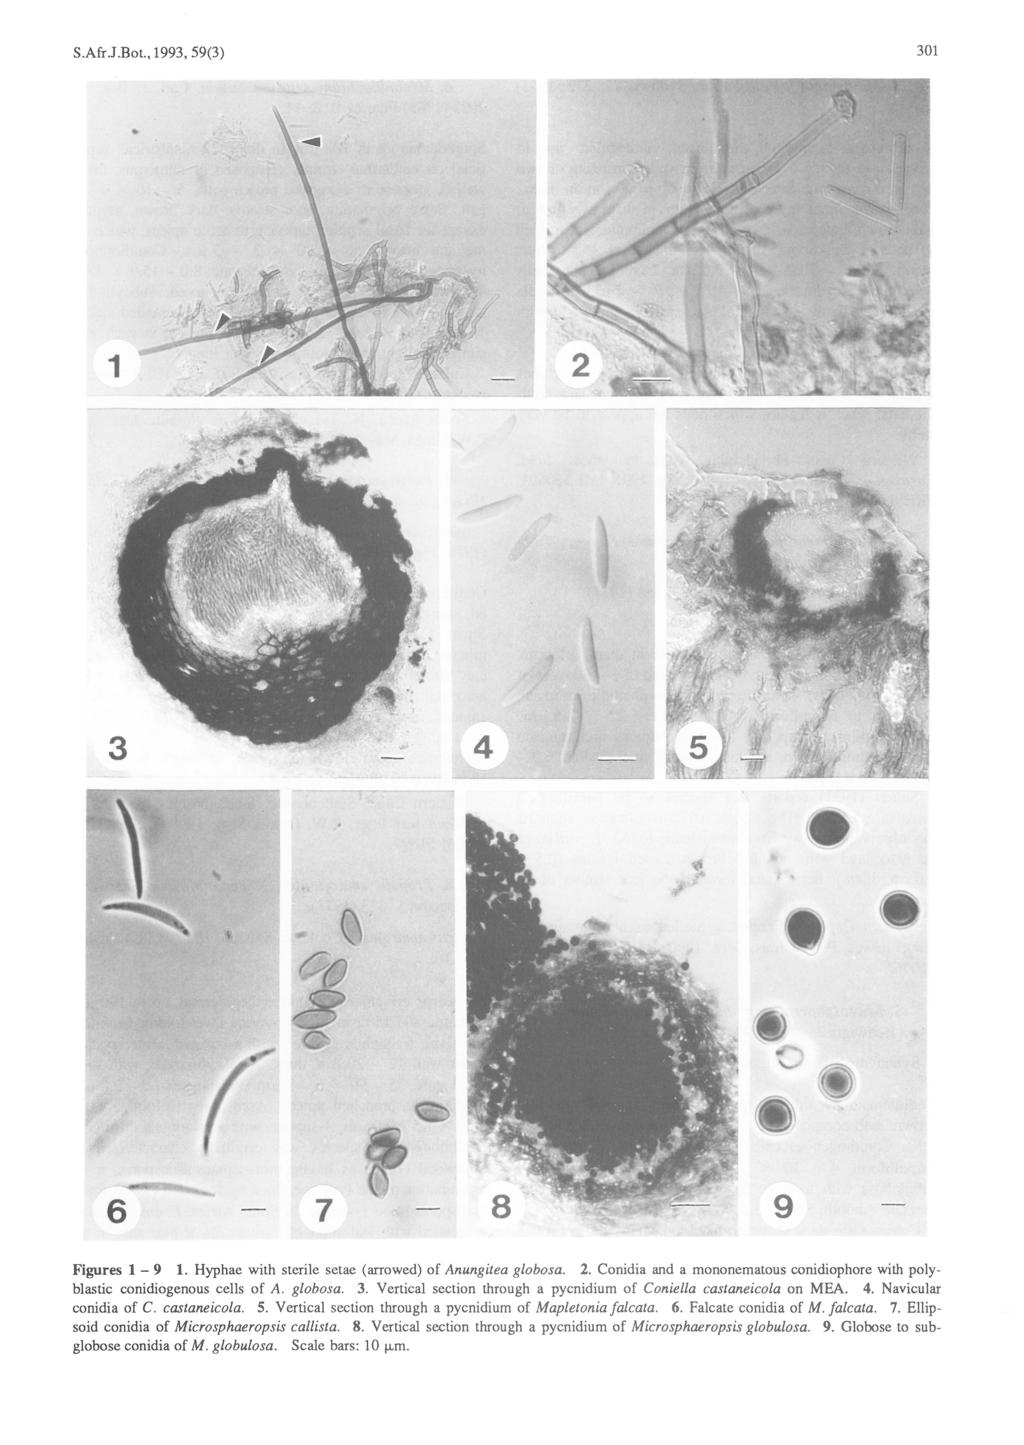 301 S.Afr.J.Bot.,1993,59(3) 6 7 Figures 1-9 1. Hyphae with sterile setae (arrowed) of Anungitea globosa. 2. Conidia and a mononematous conidiophore with polyblastic conidiogenous cells of A. globosa. 3.